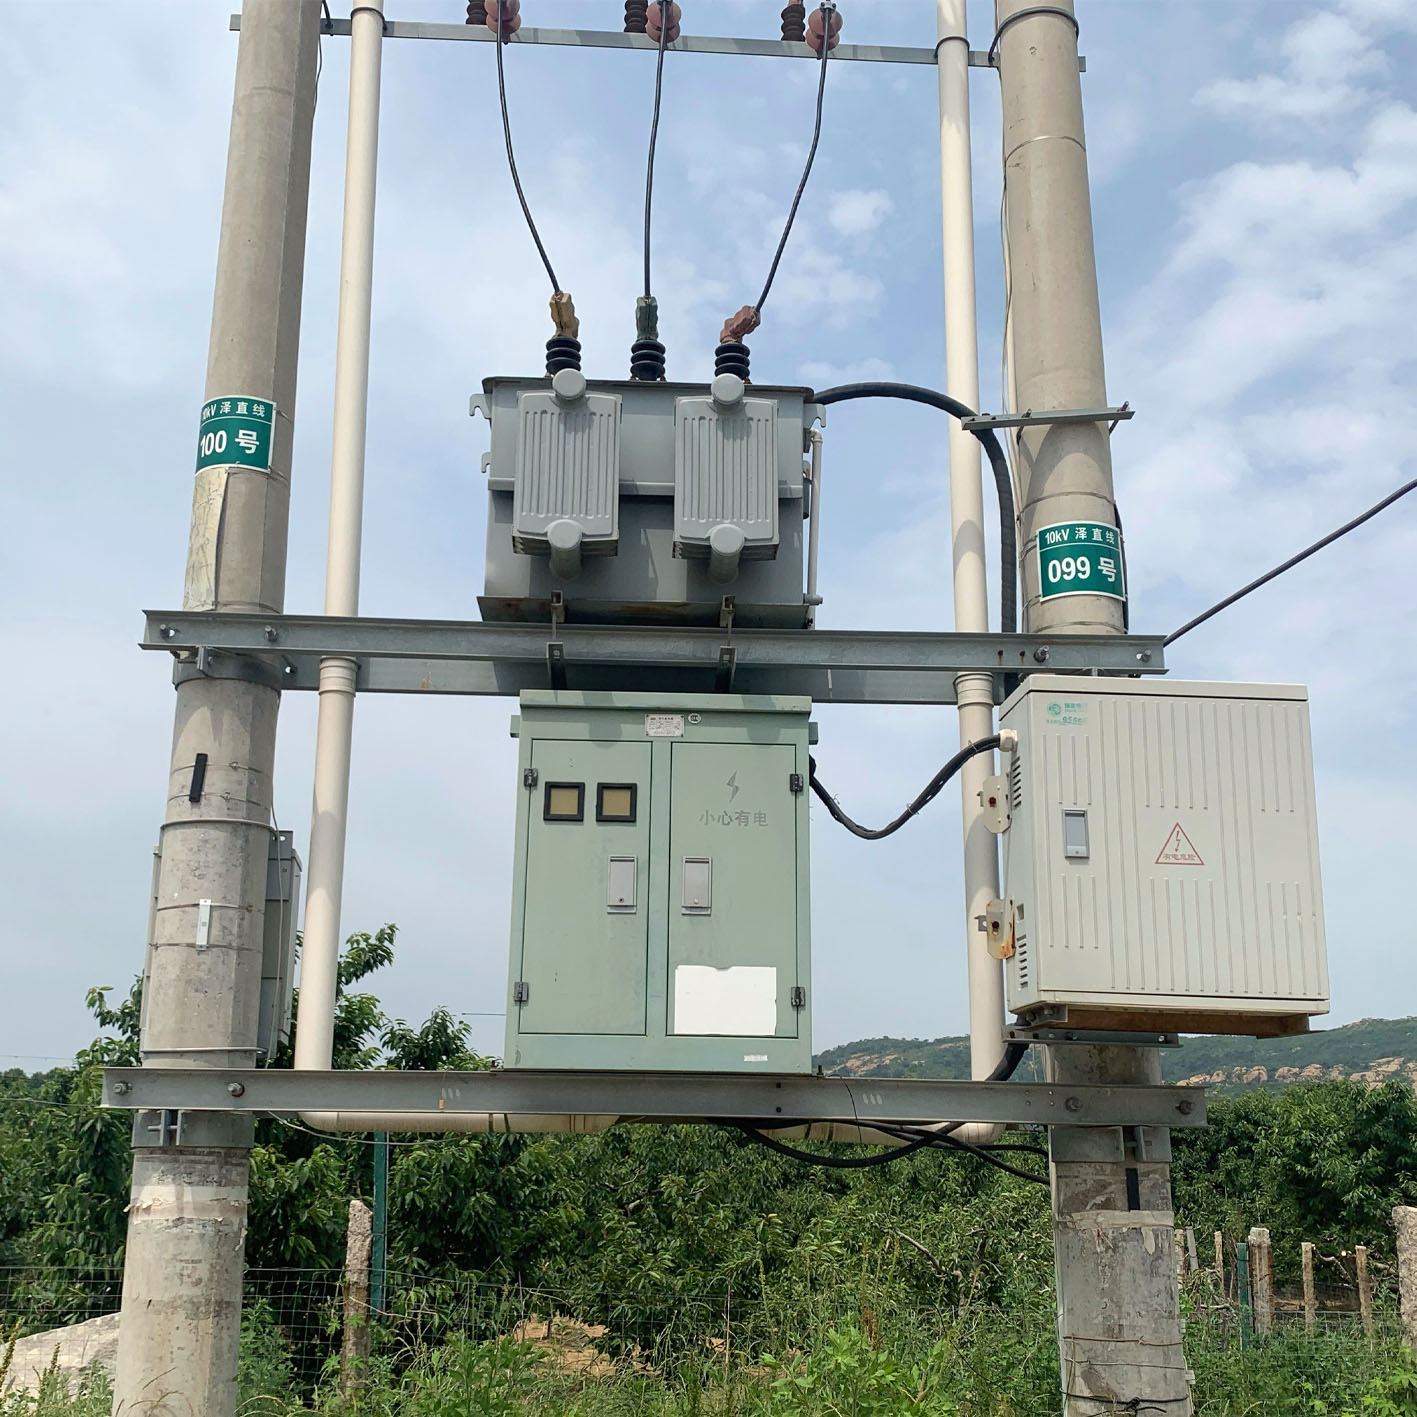 List of transformers on double pole column of 500KVA and above transformers